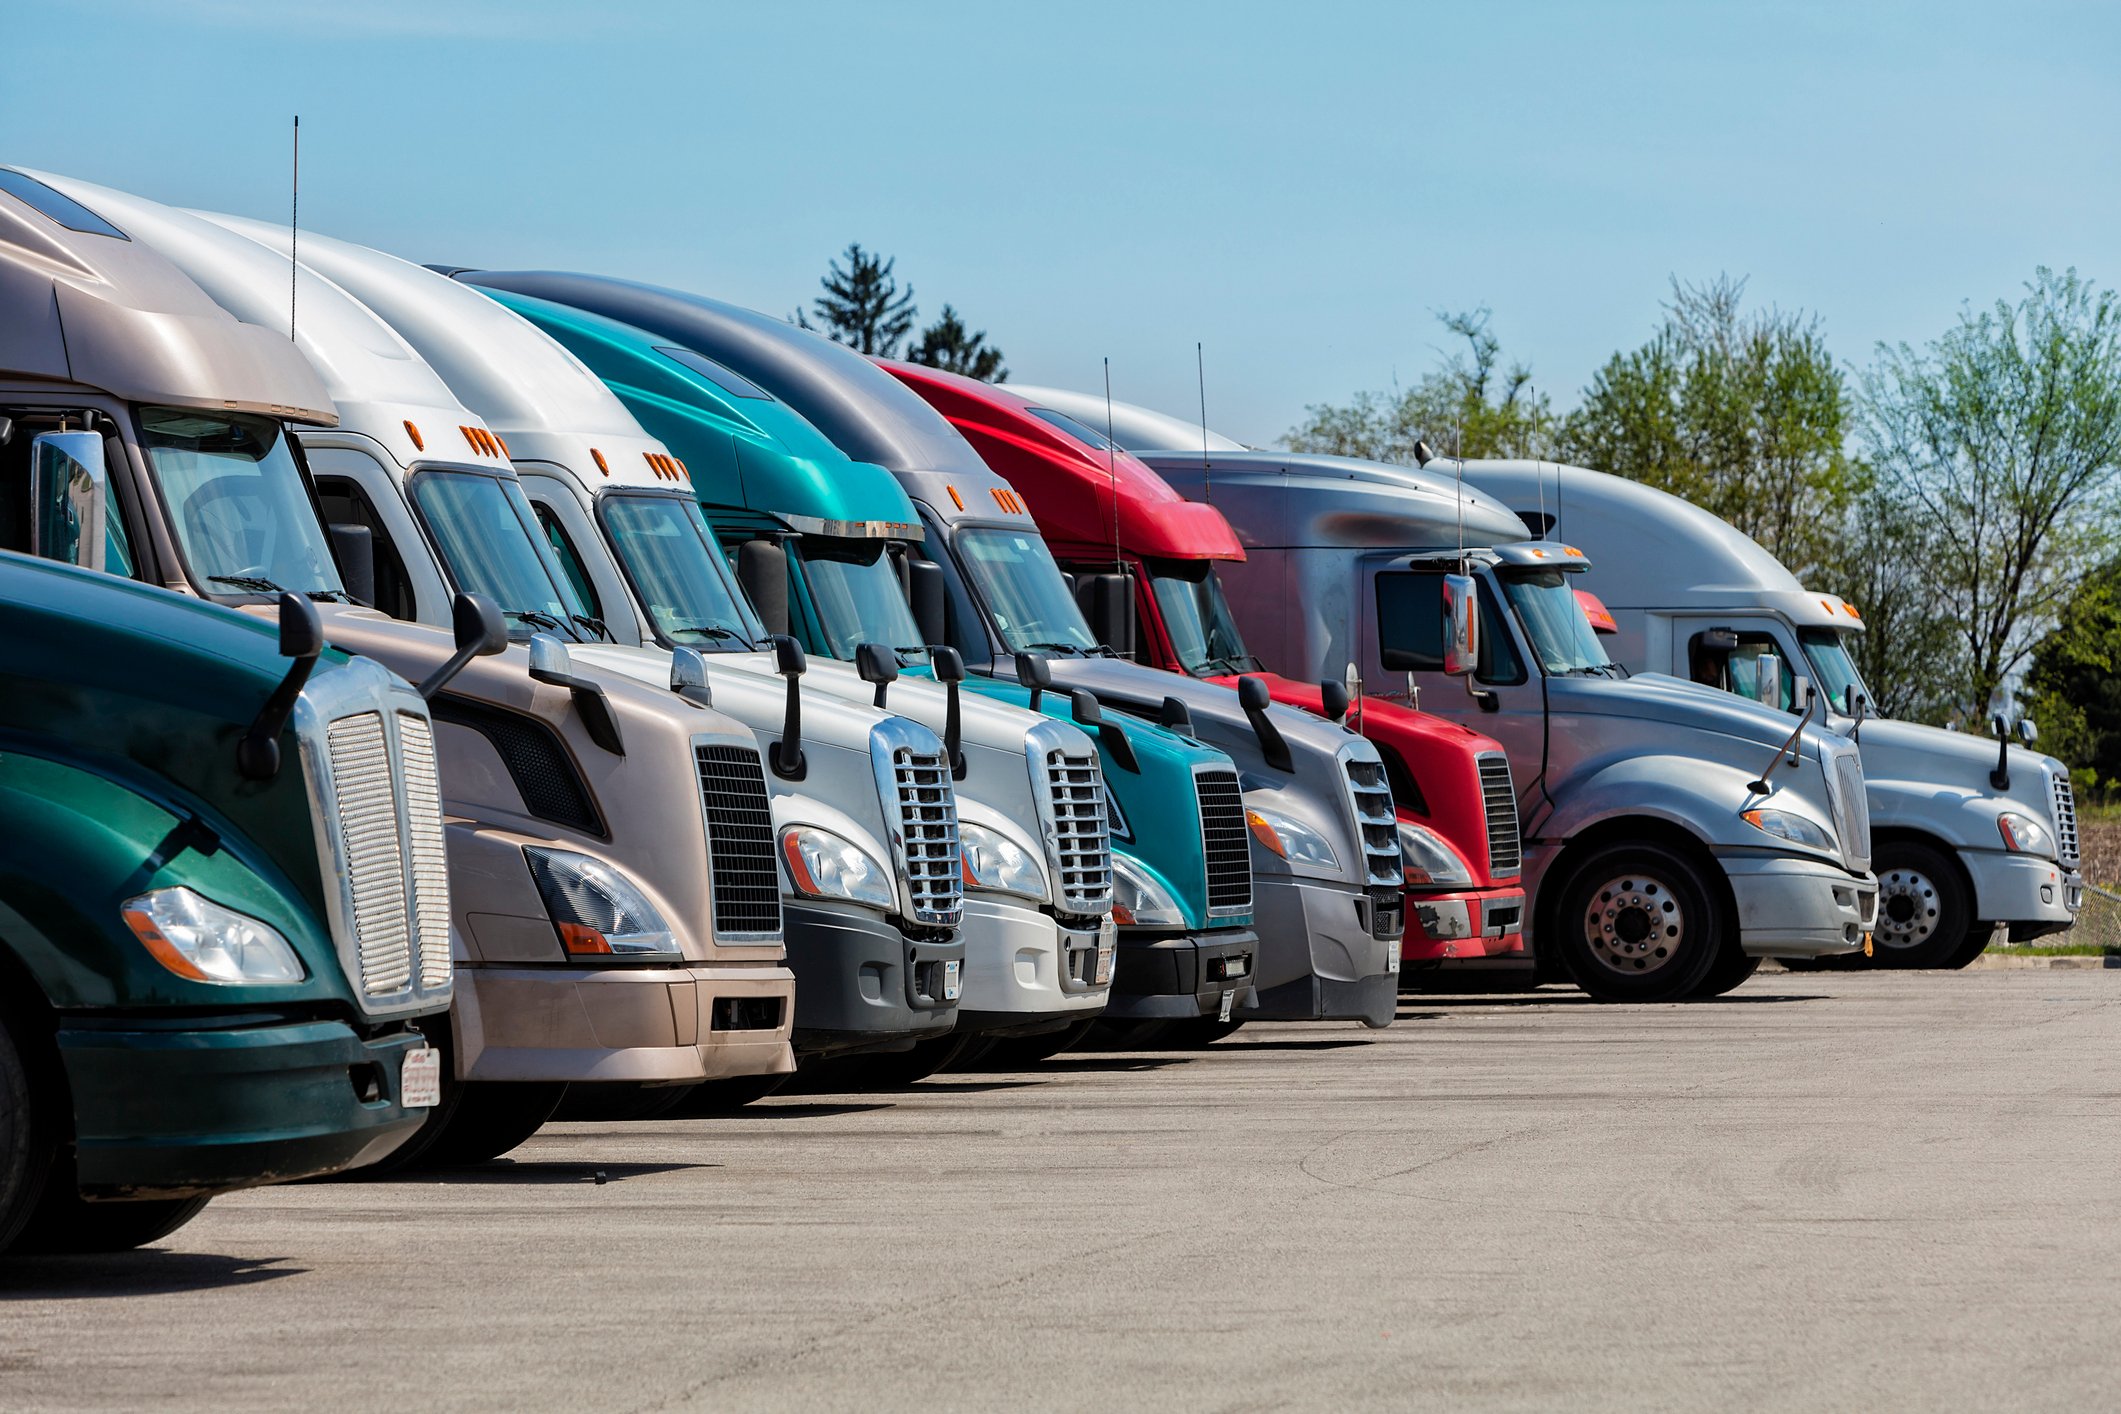 Considerations for Leasing vs. Buying Fleet Vehicles